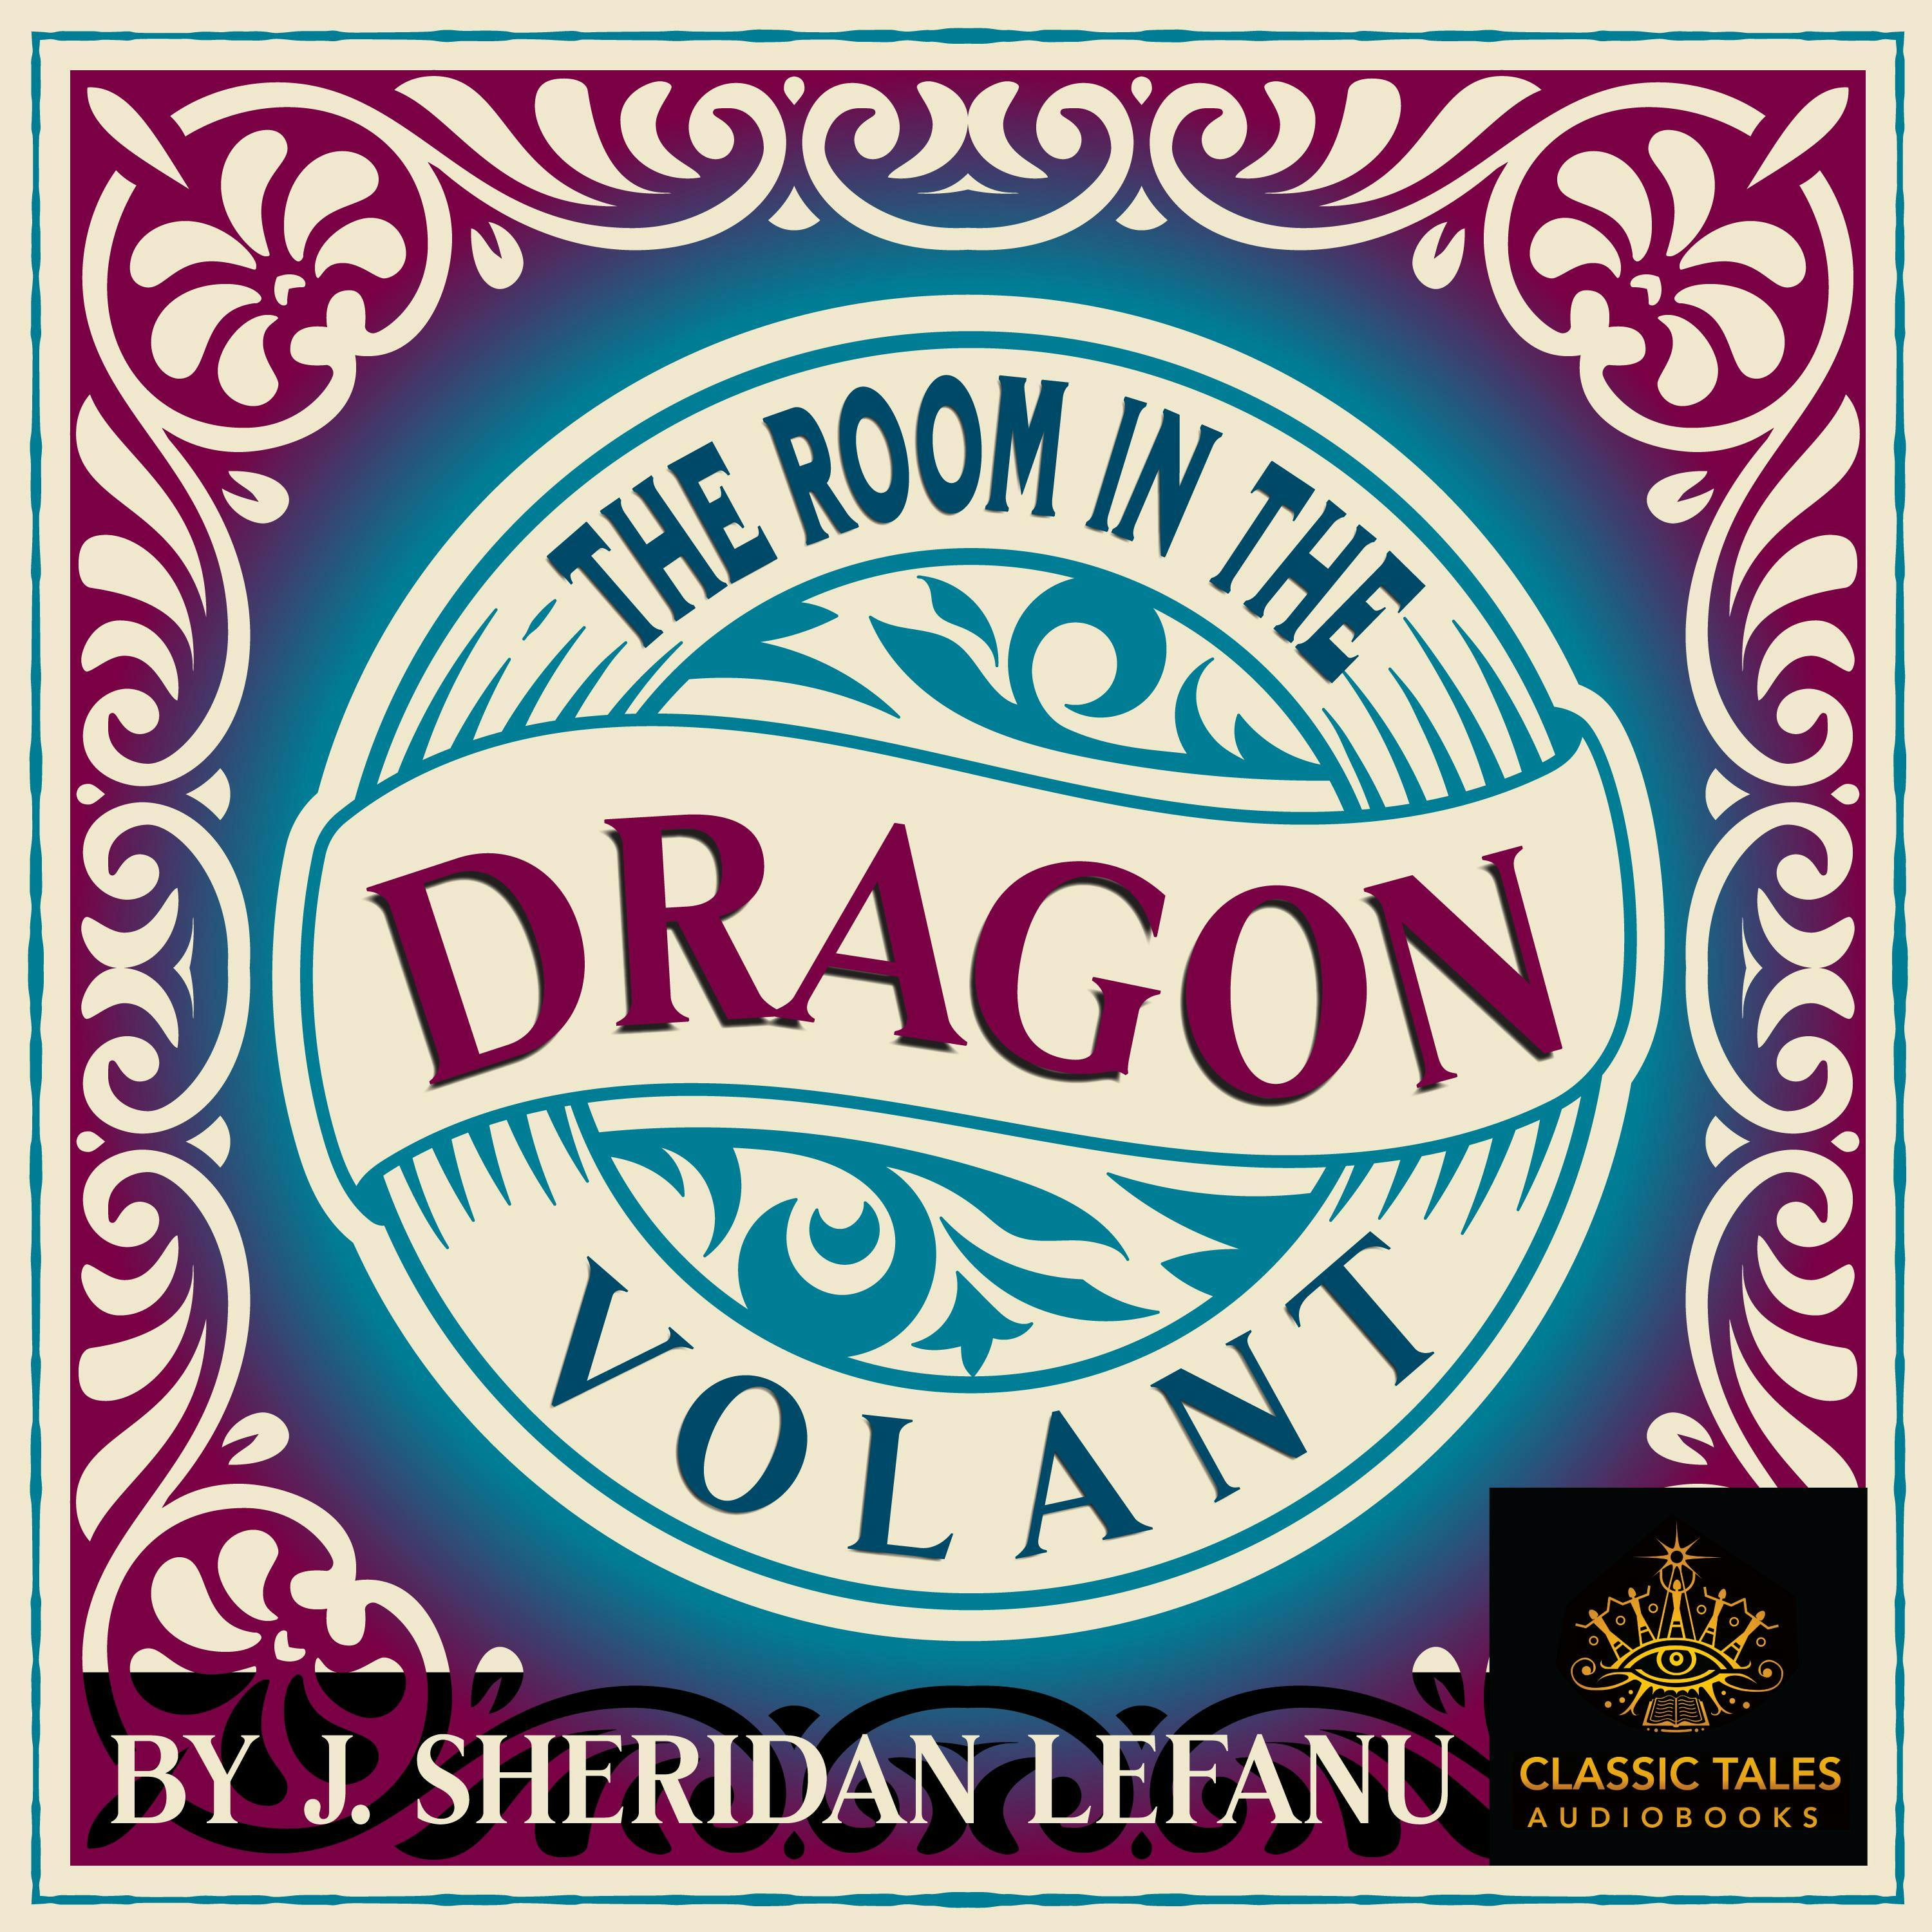 The Room in the Dragon Volant: Classic Tales Edition - J. Sheridan Lefanu